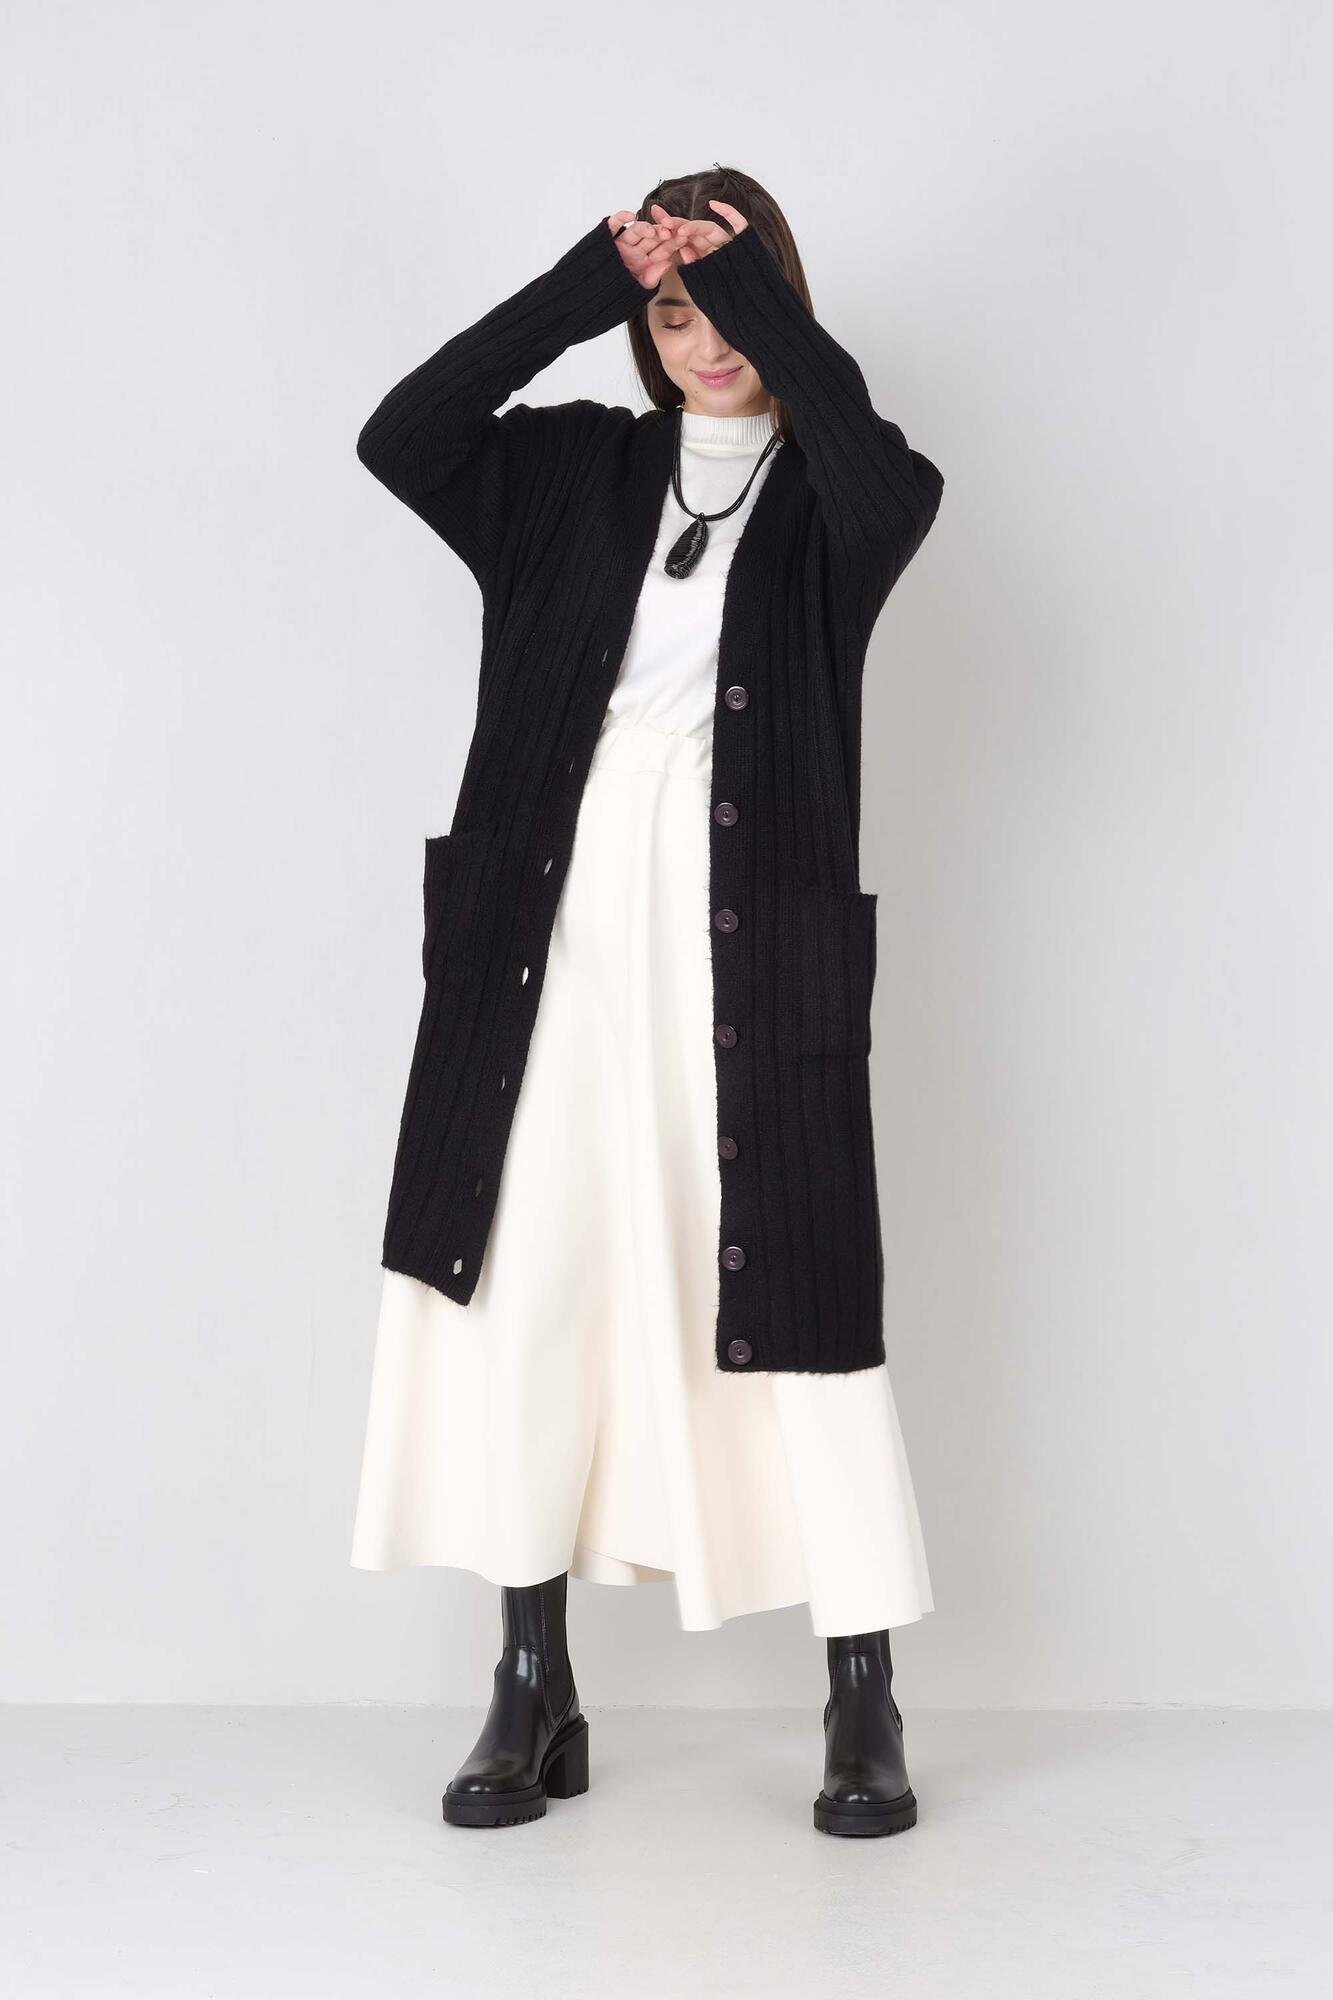 Long Cardigan Black With Pockets